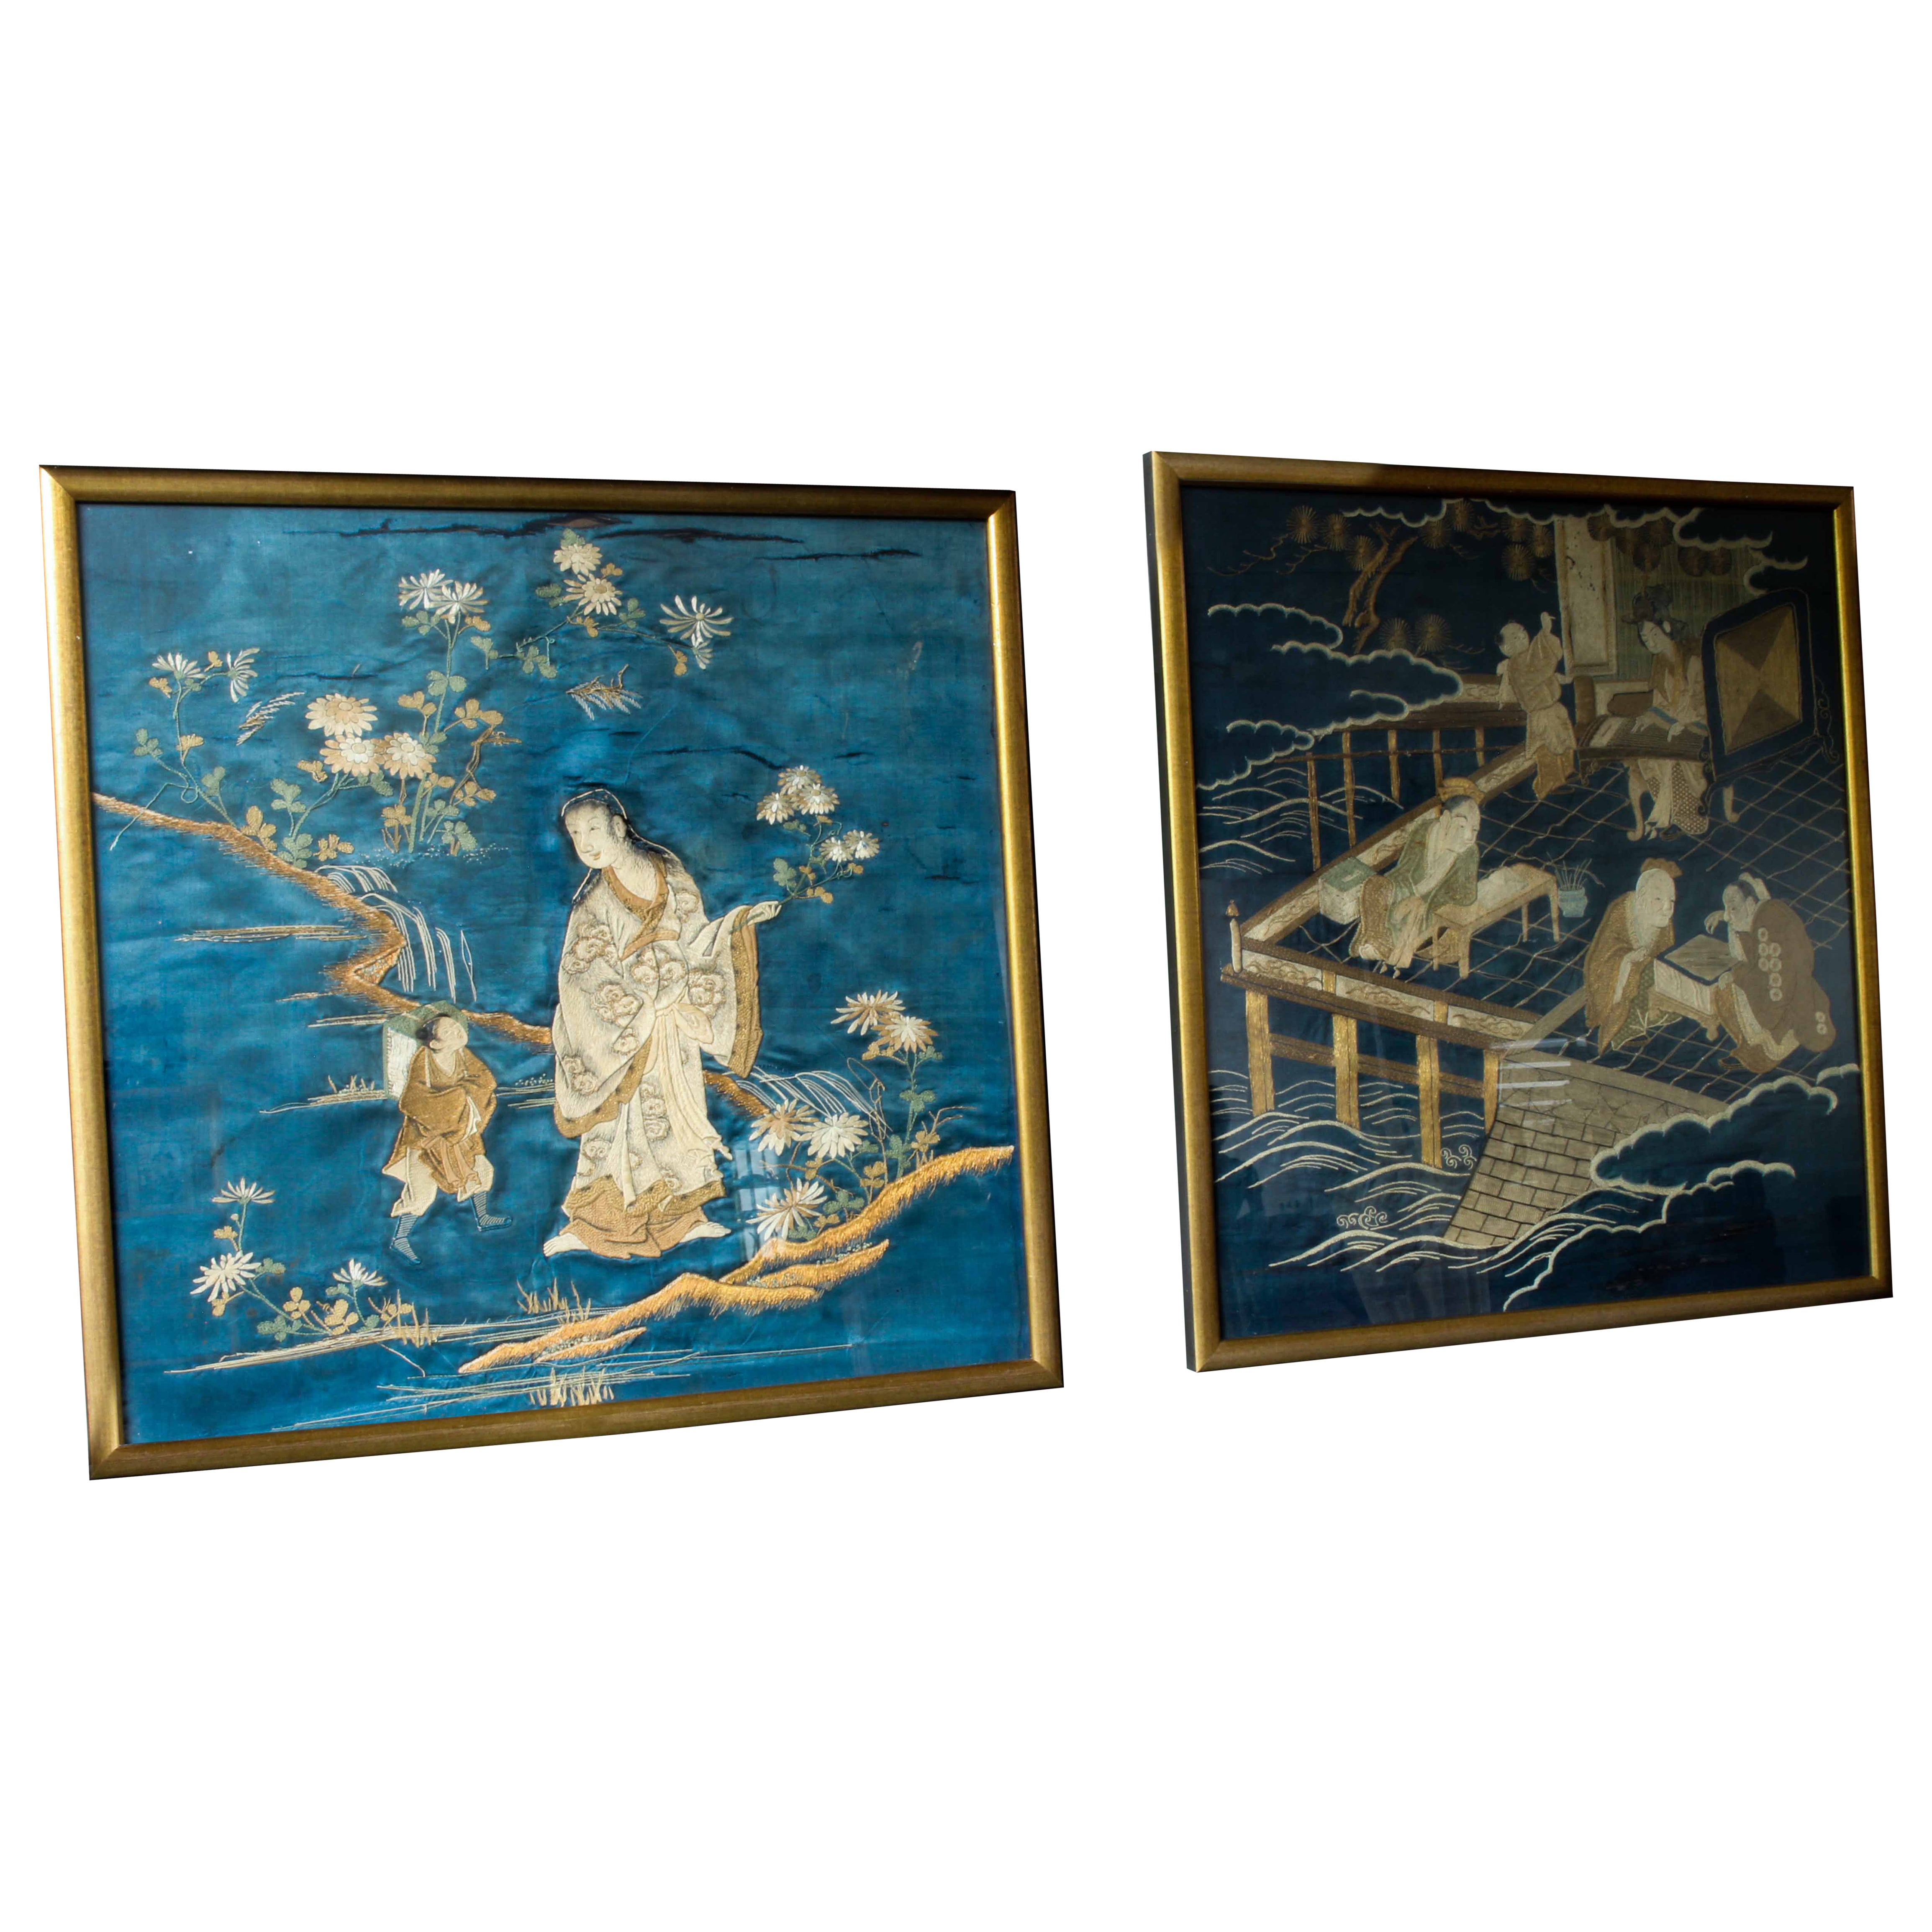 Set of 2 Framed Antique Chinese Antique Embroidered Textiles with Figures in Int